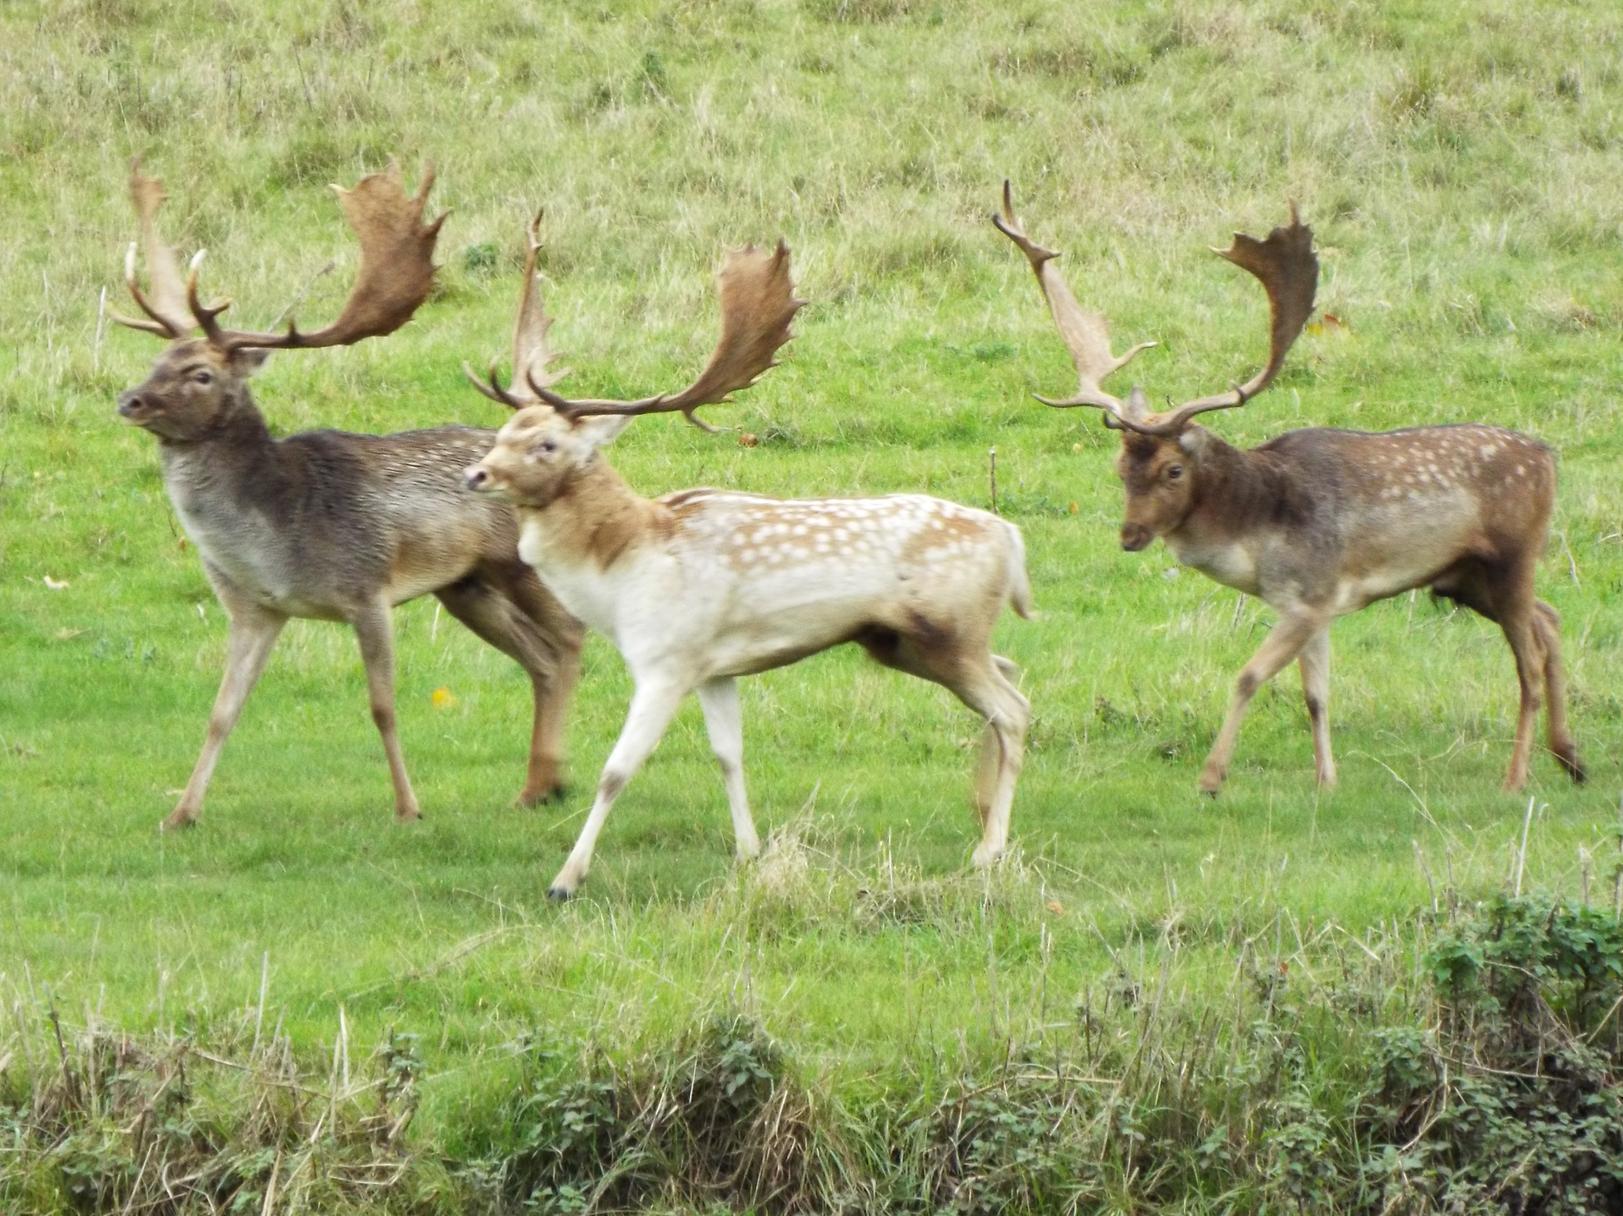 Deer at Charlecote Park. Photo by Marion W Stafford.